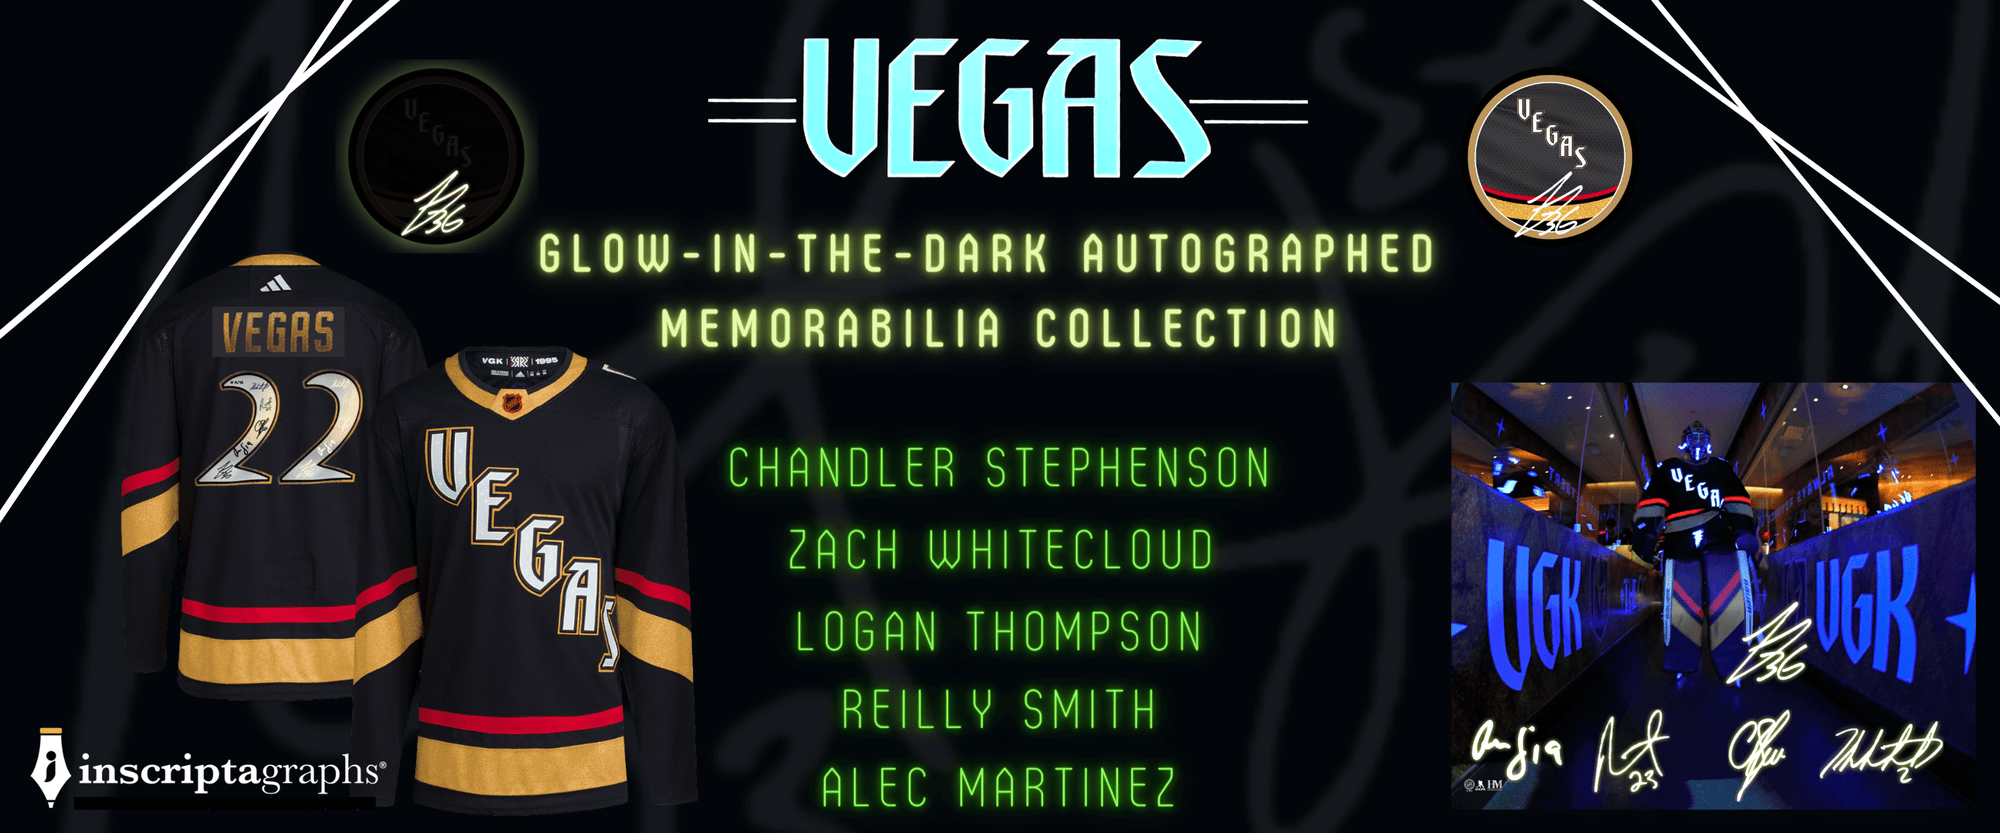 Shop the Vegas Hockey Retro Glow in the Dark Autographed Memorabilia Collection featuring autographs of Chandler Stephenson, Zach Whitecloud, Alec Martinez, Logan Thompson and Reilly Smith! Purchase signed hockey pucks, jerseys, photos, game day posters & more!